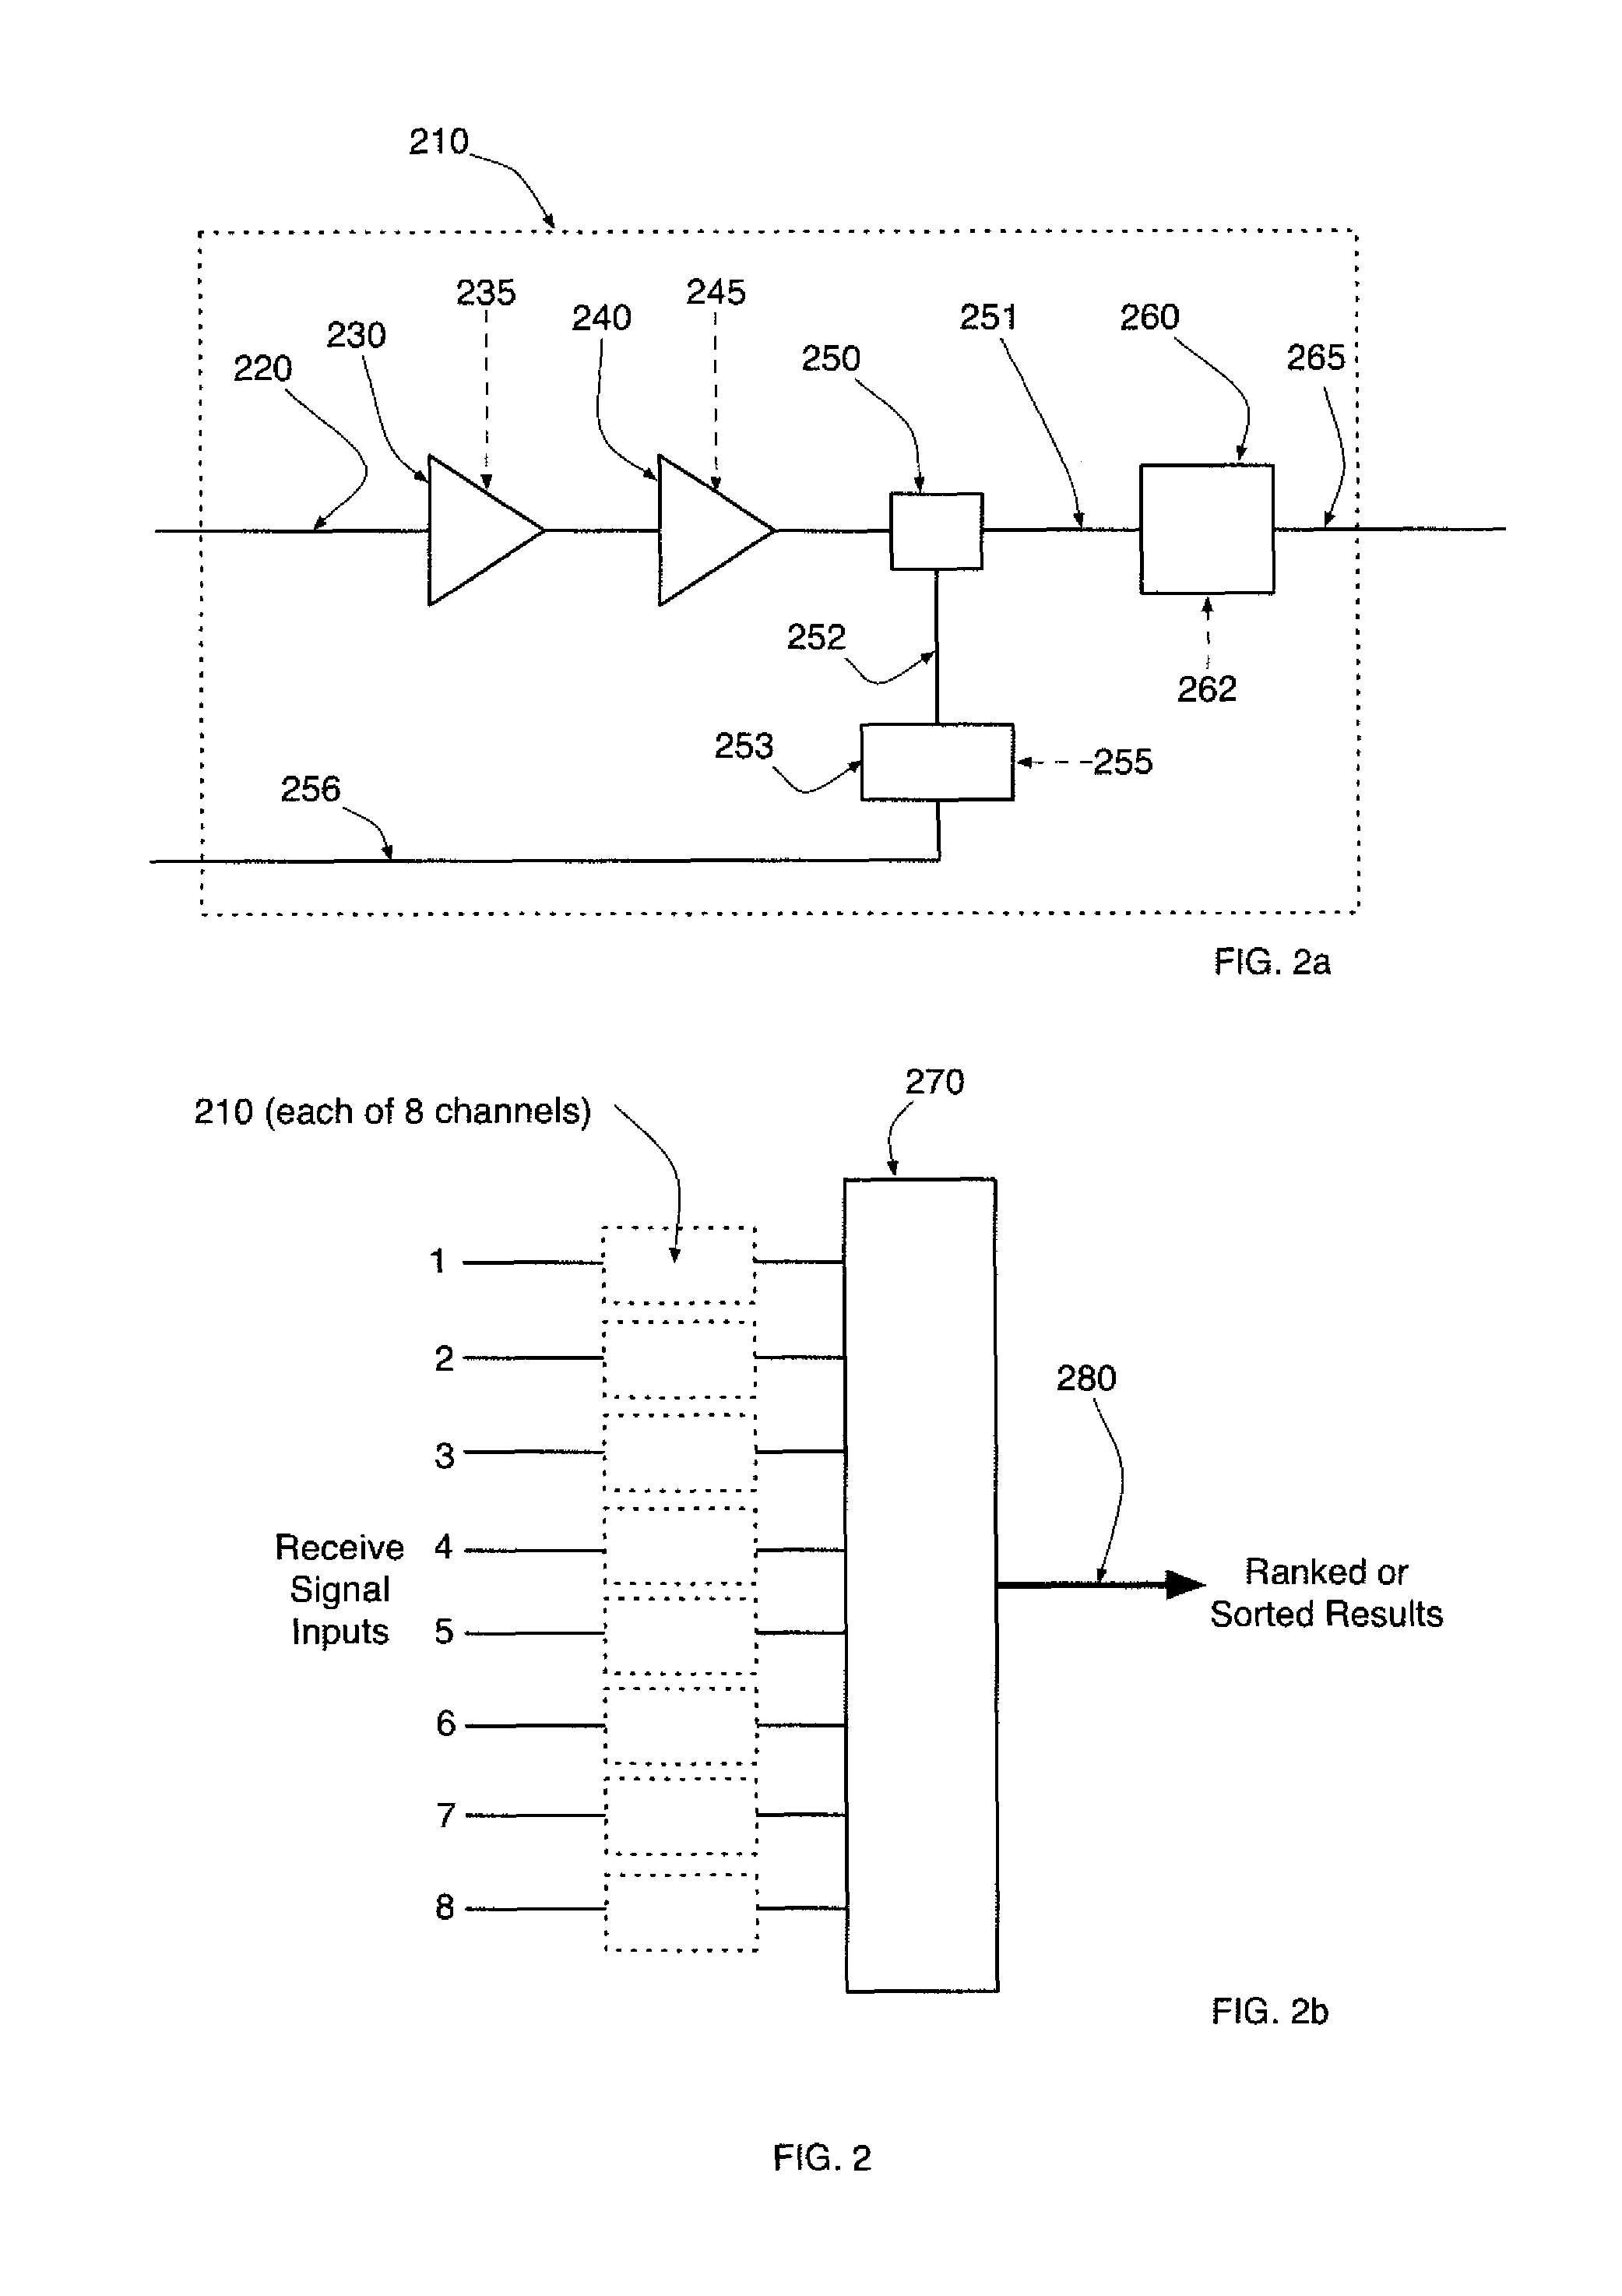 Control loop management and differential delay correction for vector signaling code communications links